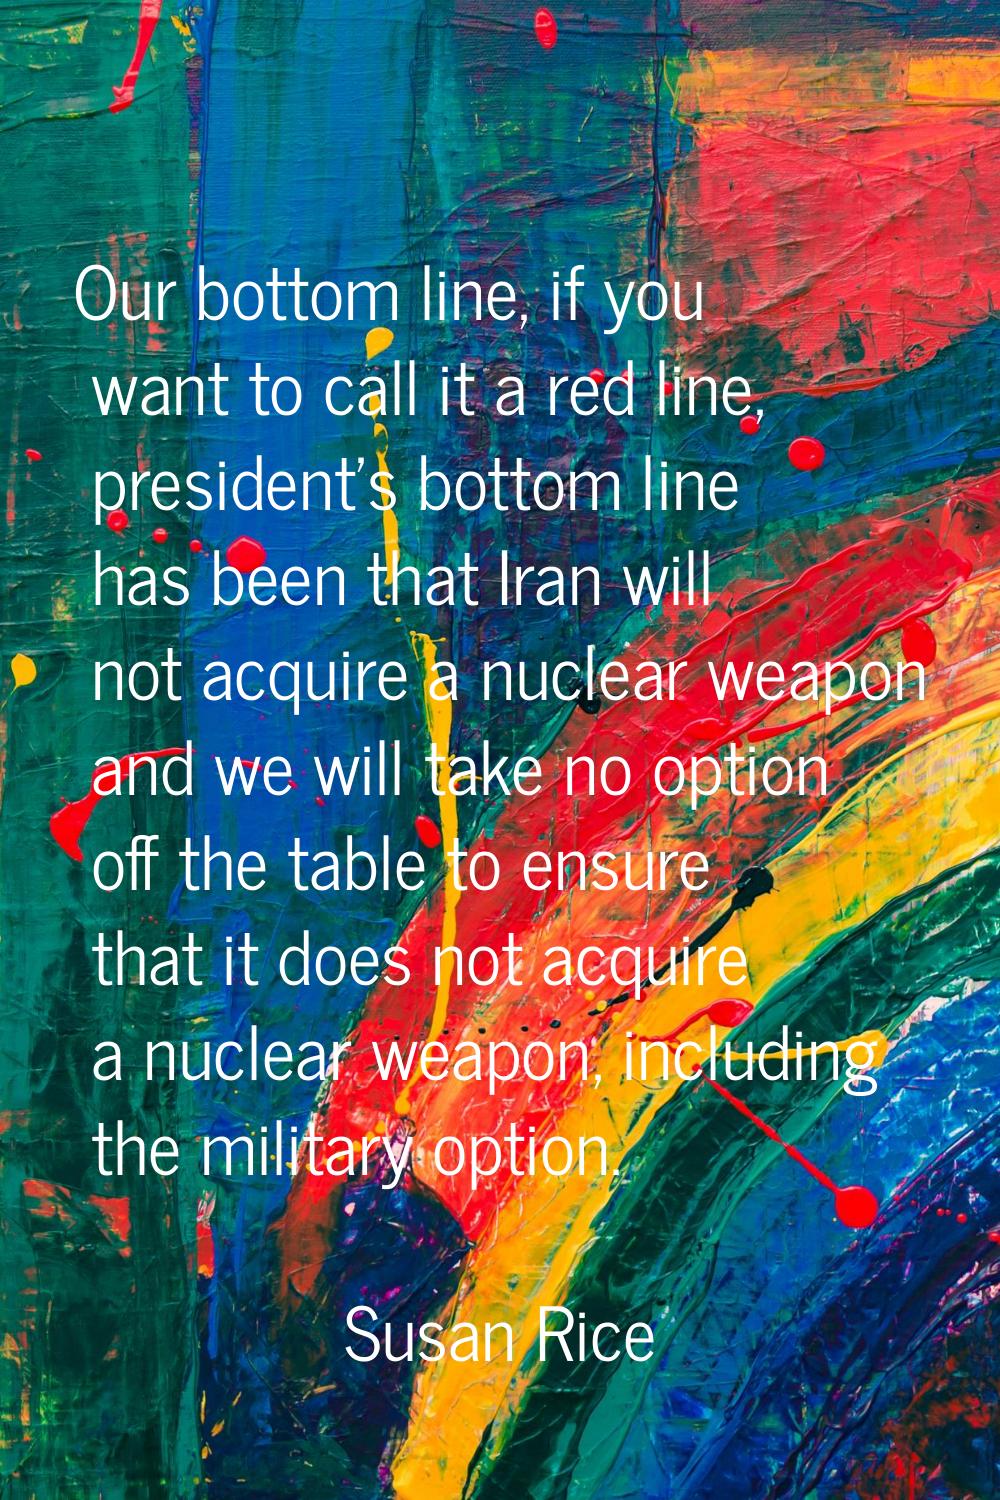 Our bottom line, if you want to call it a red line, president's bottom line has been that Iran will